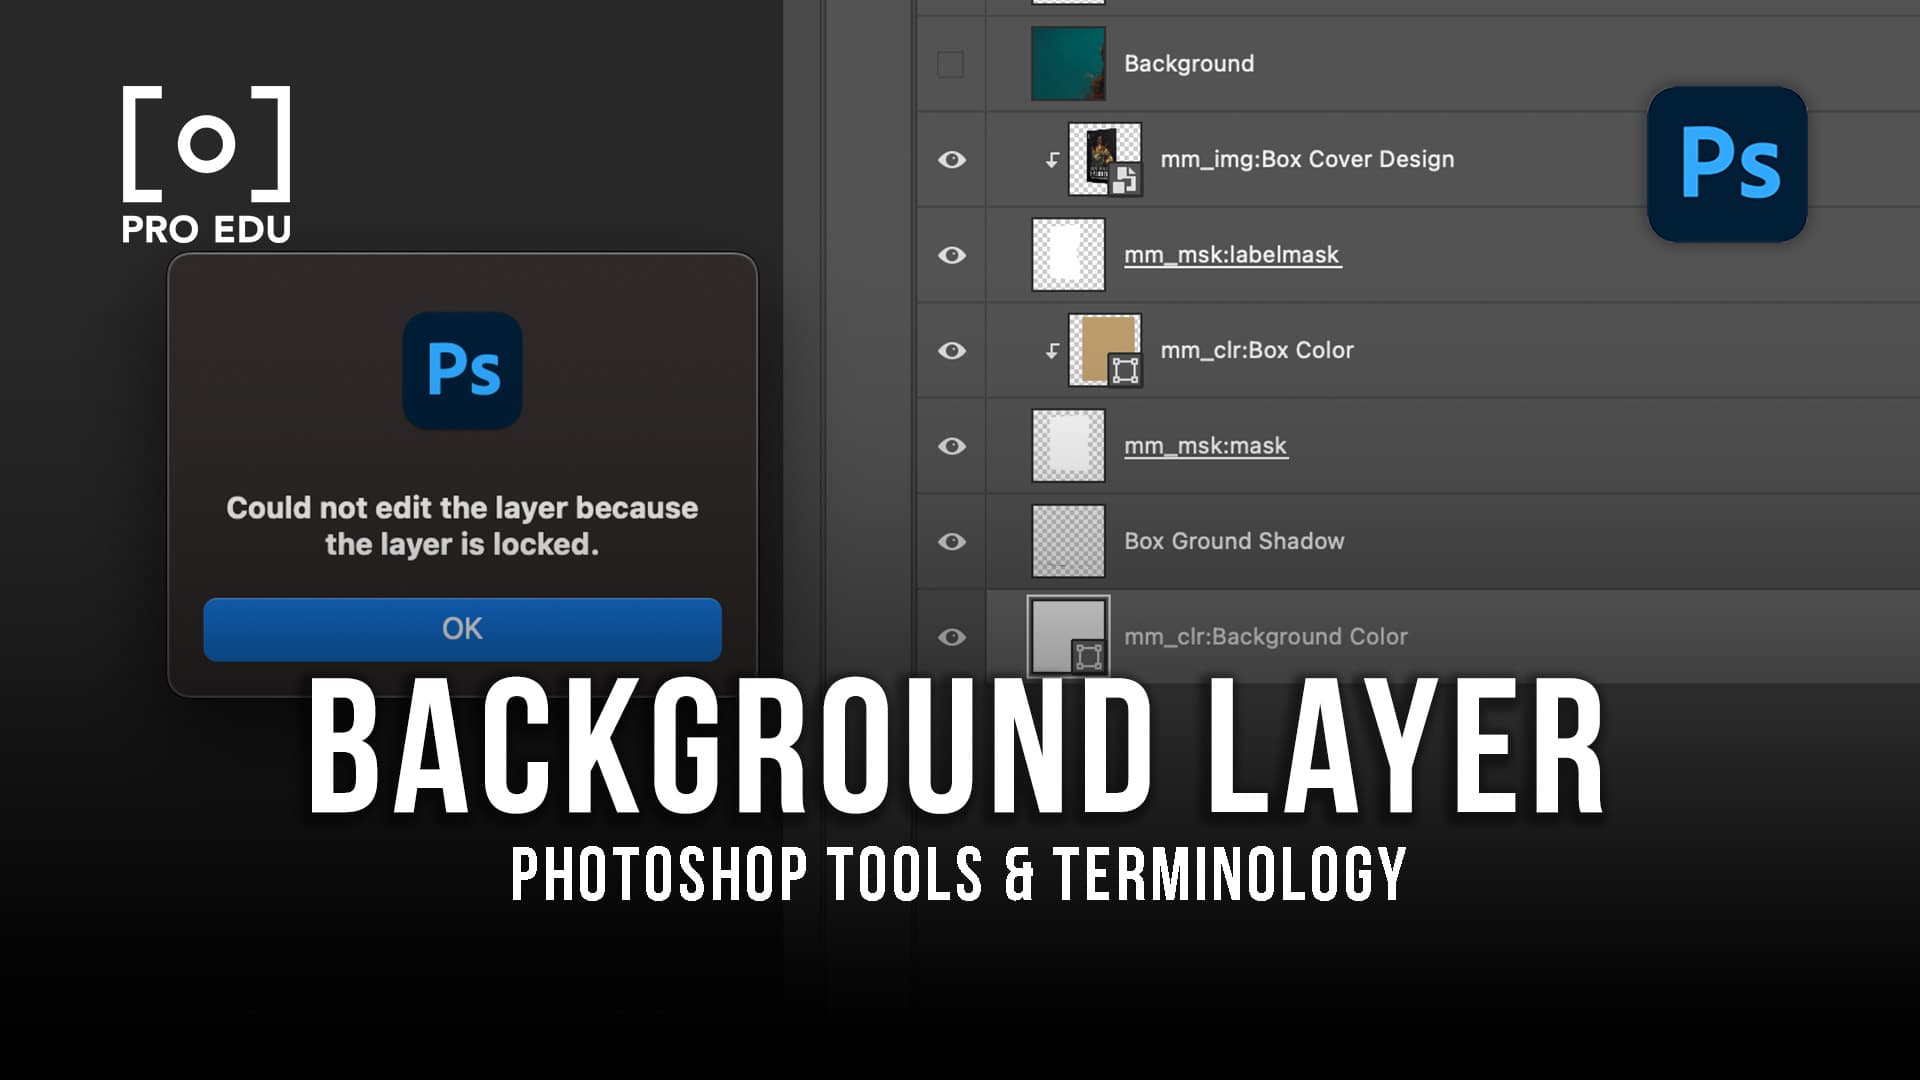 Background Layer Functions in Photoshop - PRO EDU Guide